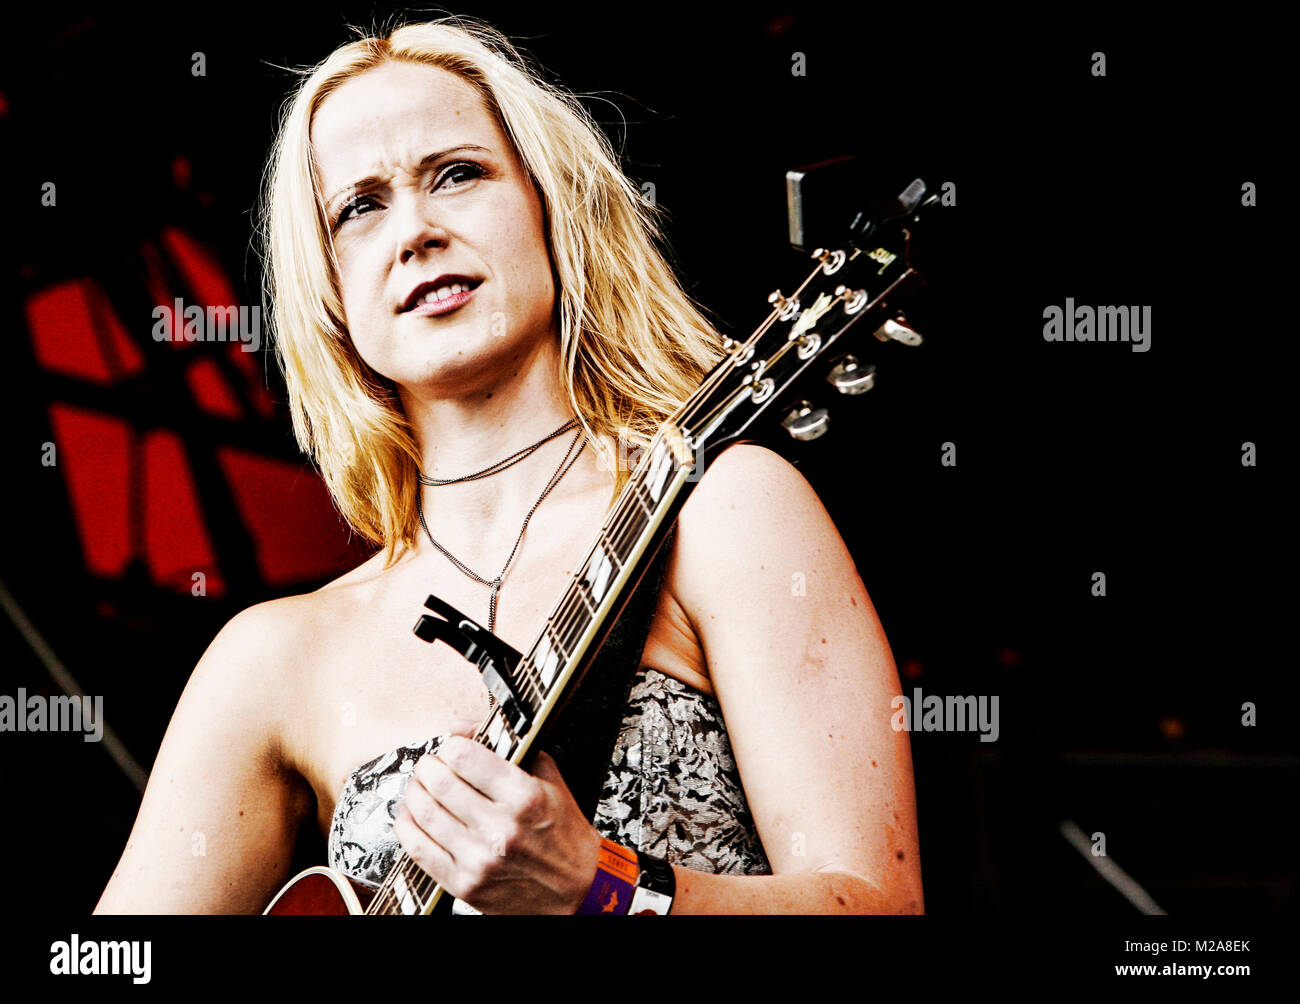 The Danish singer, musician and songwriter Tina Dickow (known as Tina Dico  abroad) performs a live concert a live concert at the Orange Stage at  Roskilde Festival 2008. Denmark, 06/07 2008 Stock Photo - Alamy